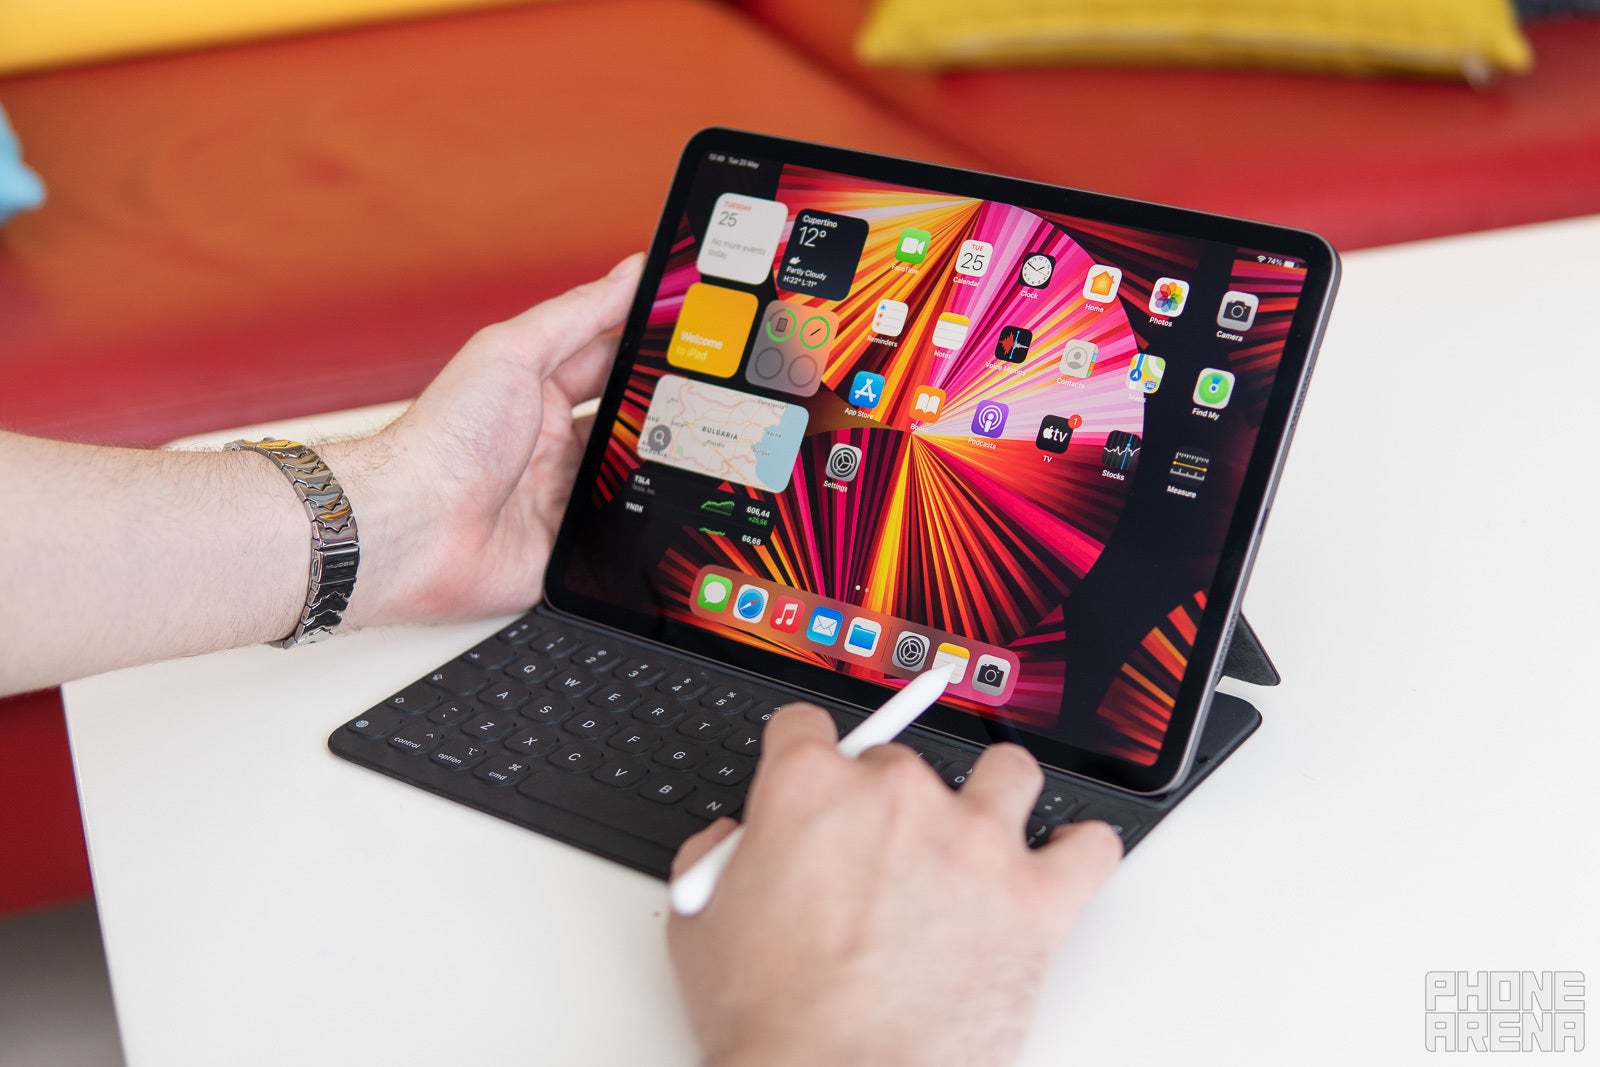 The iPad will never have macOS, that's why